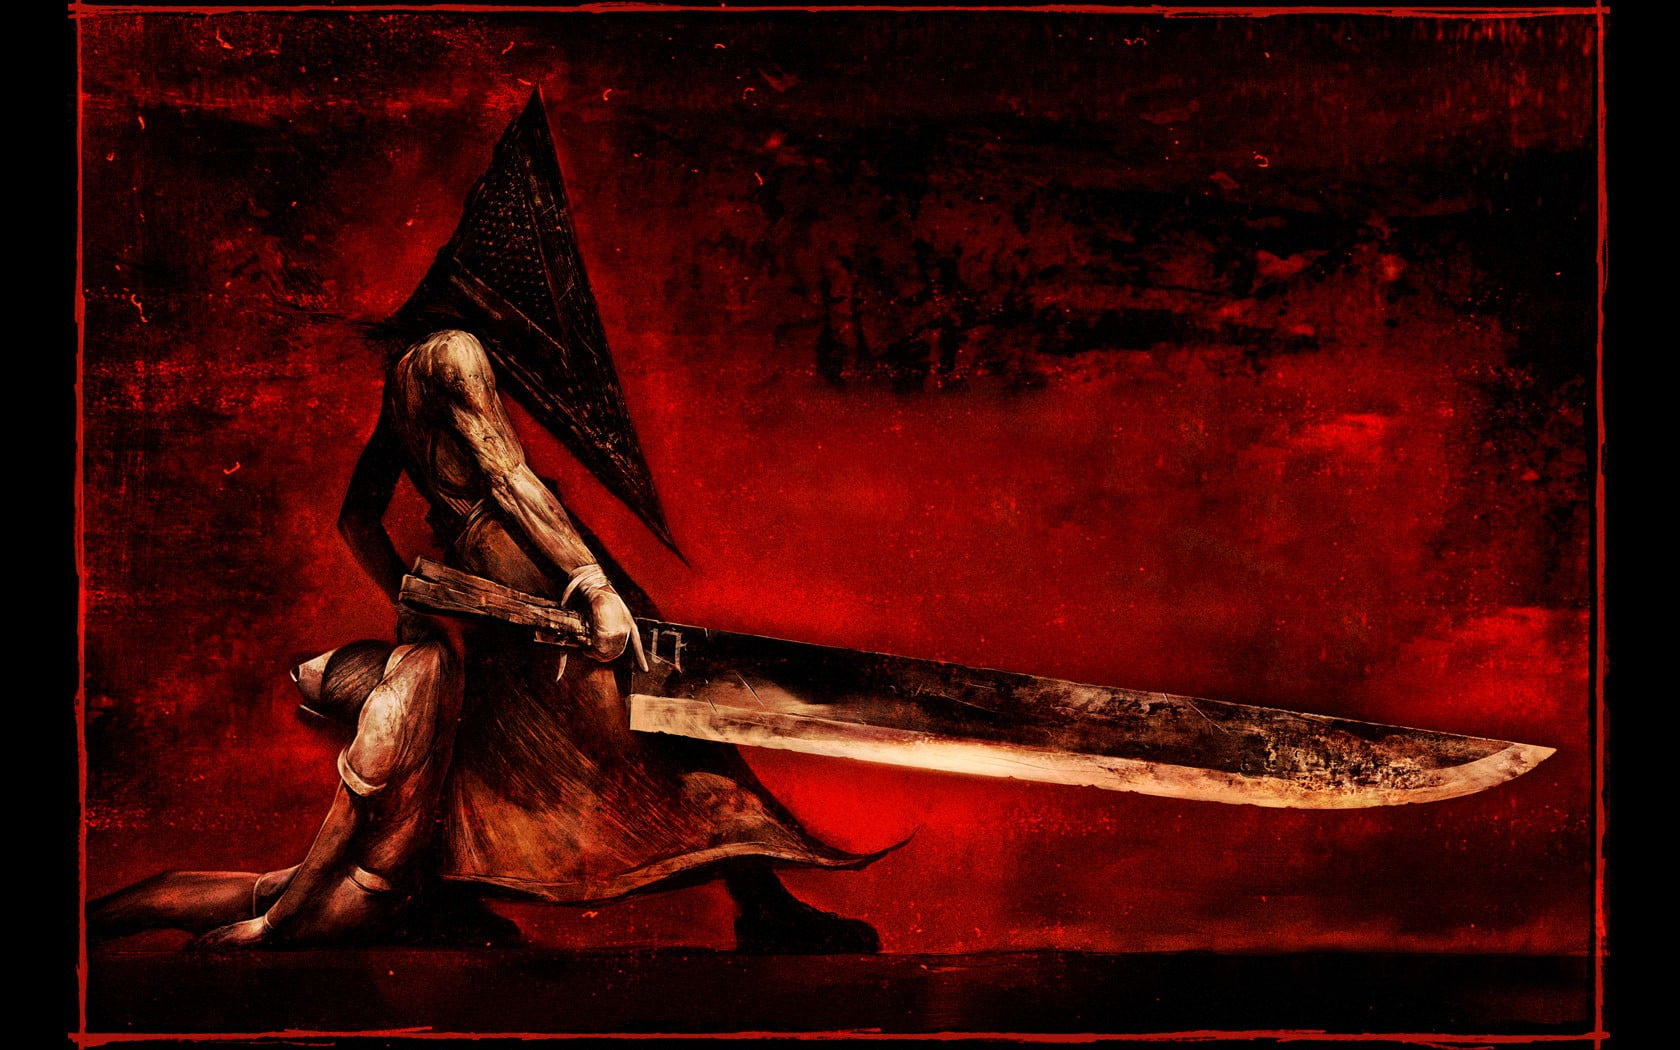 swordsman painting, Silent Hill, Pyramid Head, video games, auto post production filter